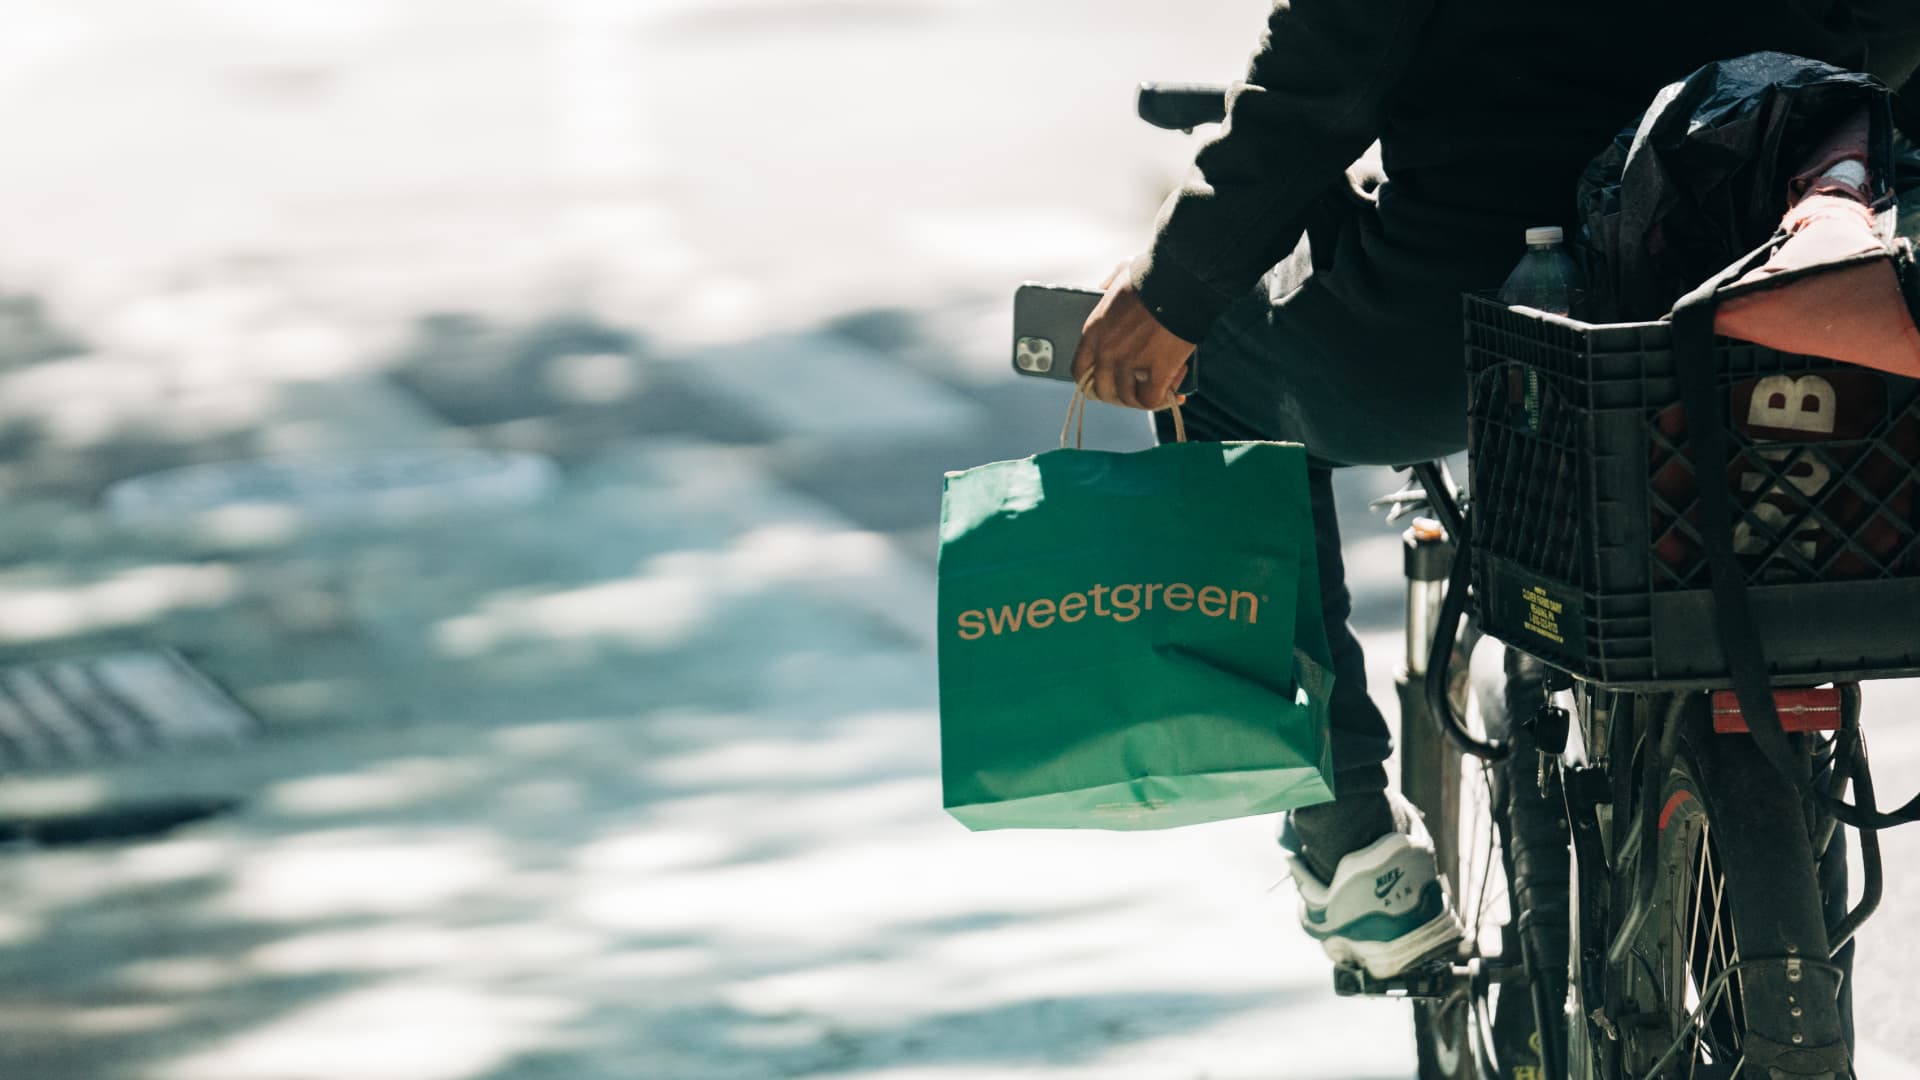 Sweetgreen, Chipotle and Wingstop aren’t seeing a consumer slowdown